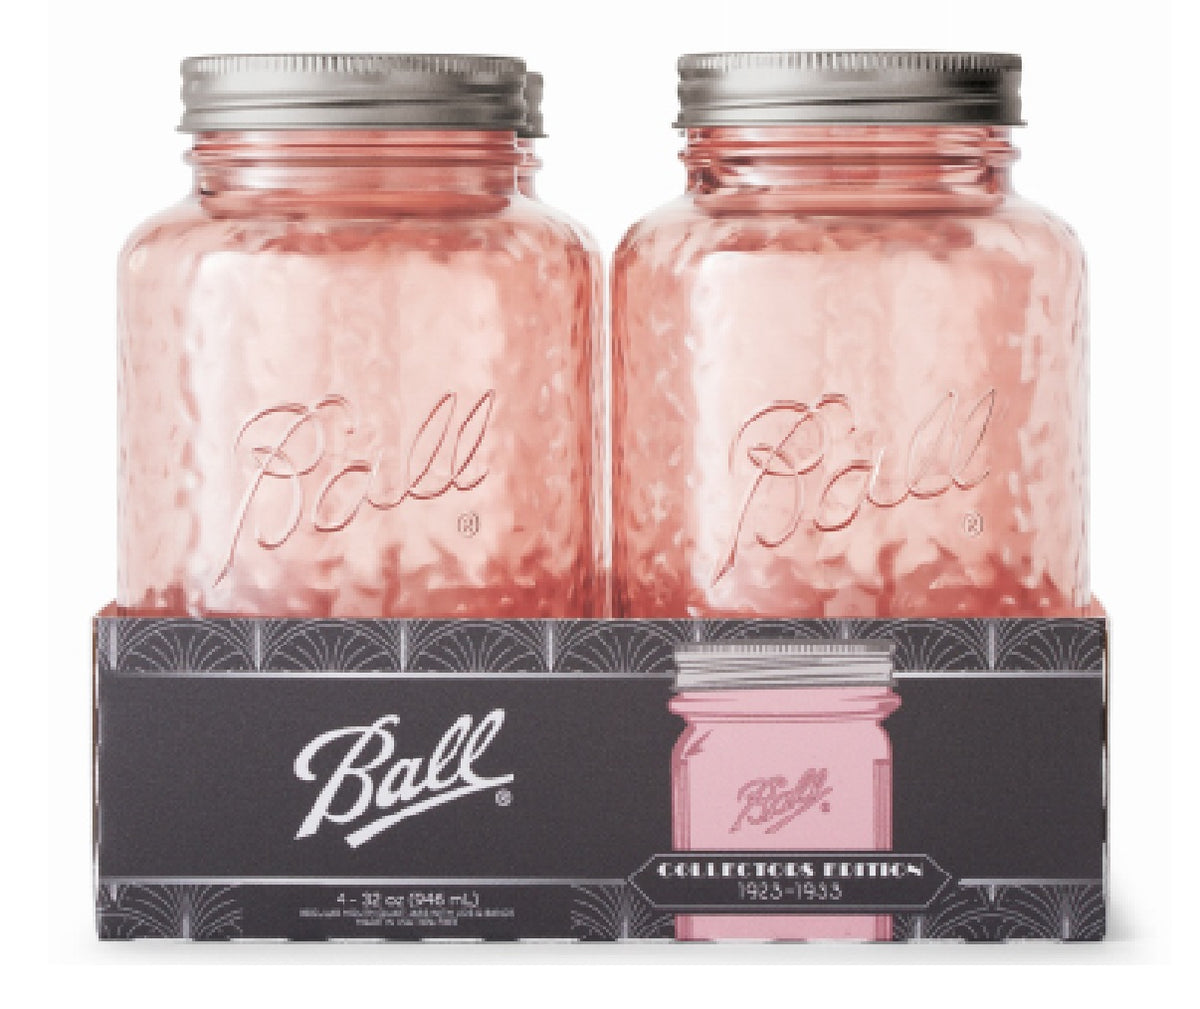 Ball 1440069046 Collection Elite Wide Mouth Canning Jar, Assorted Colors, 32 Oz